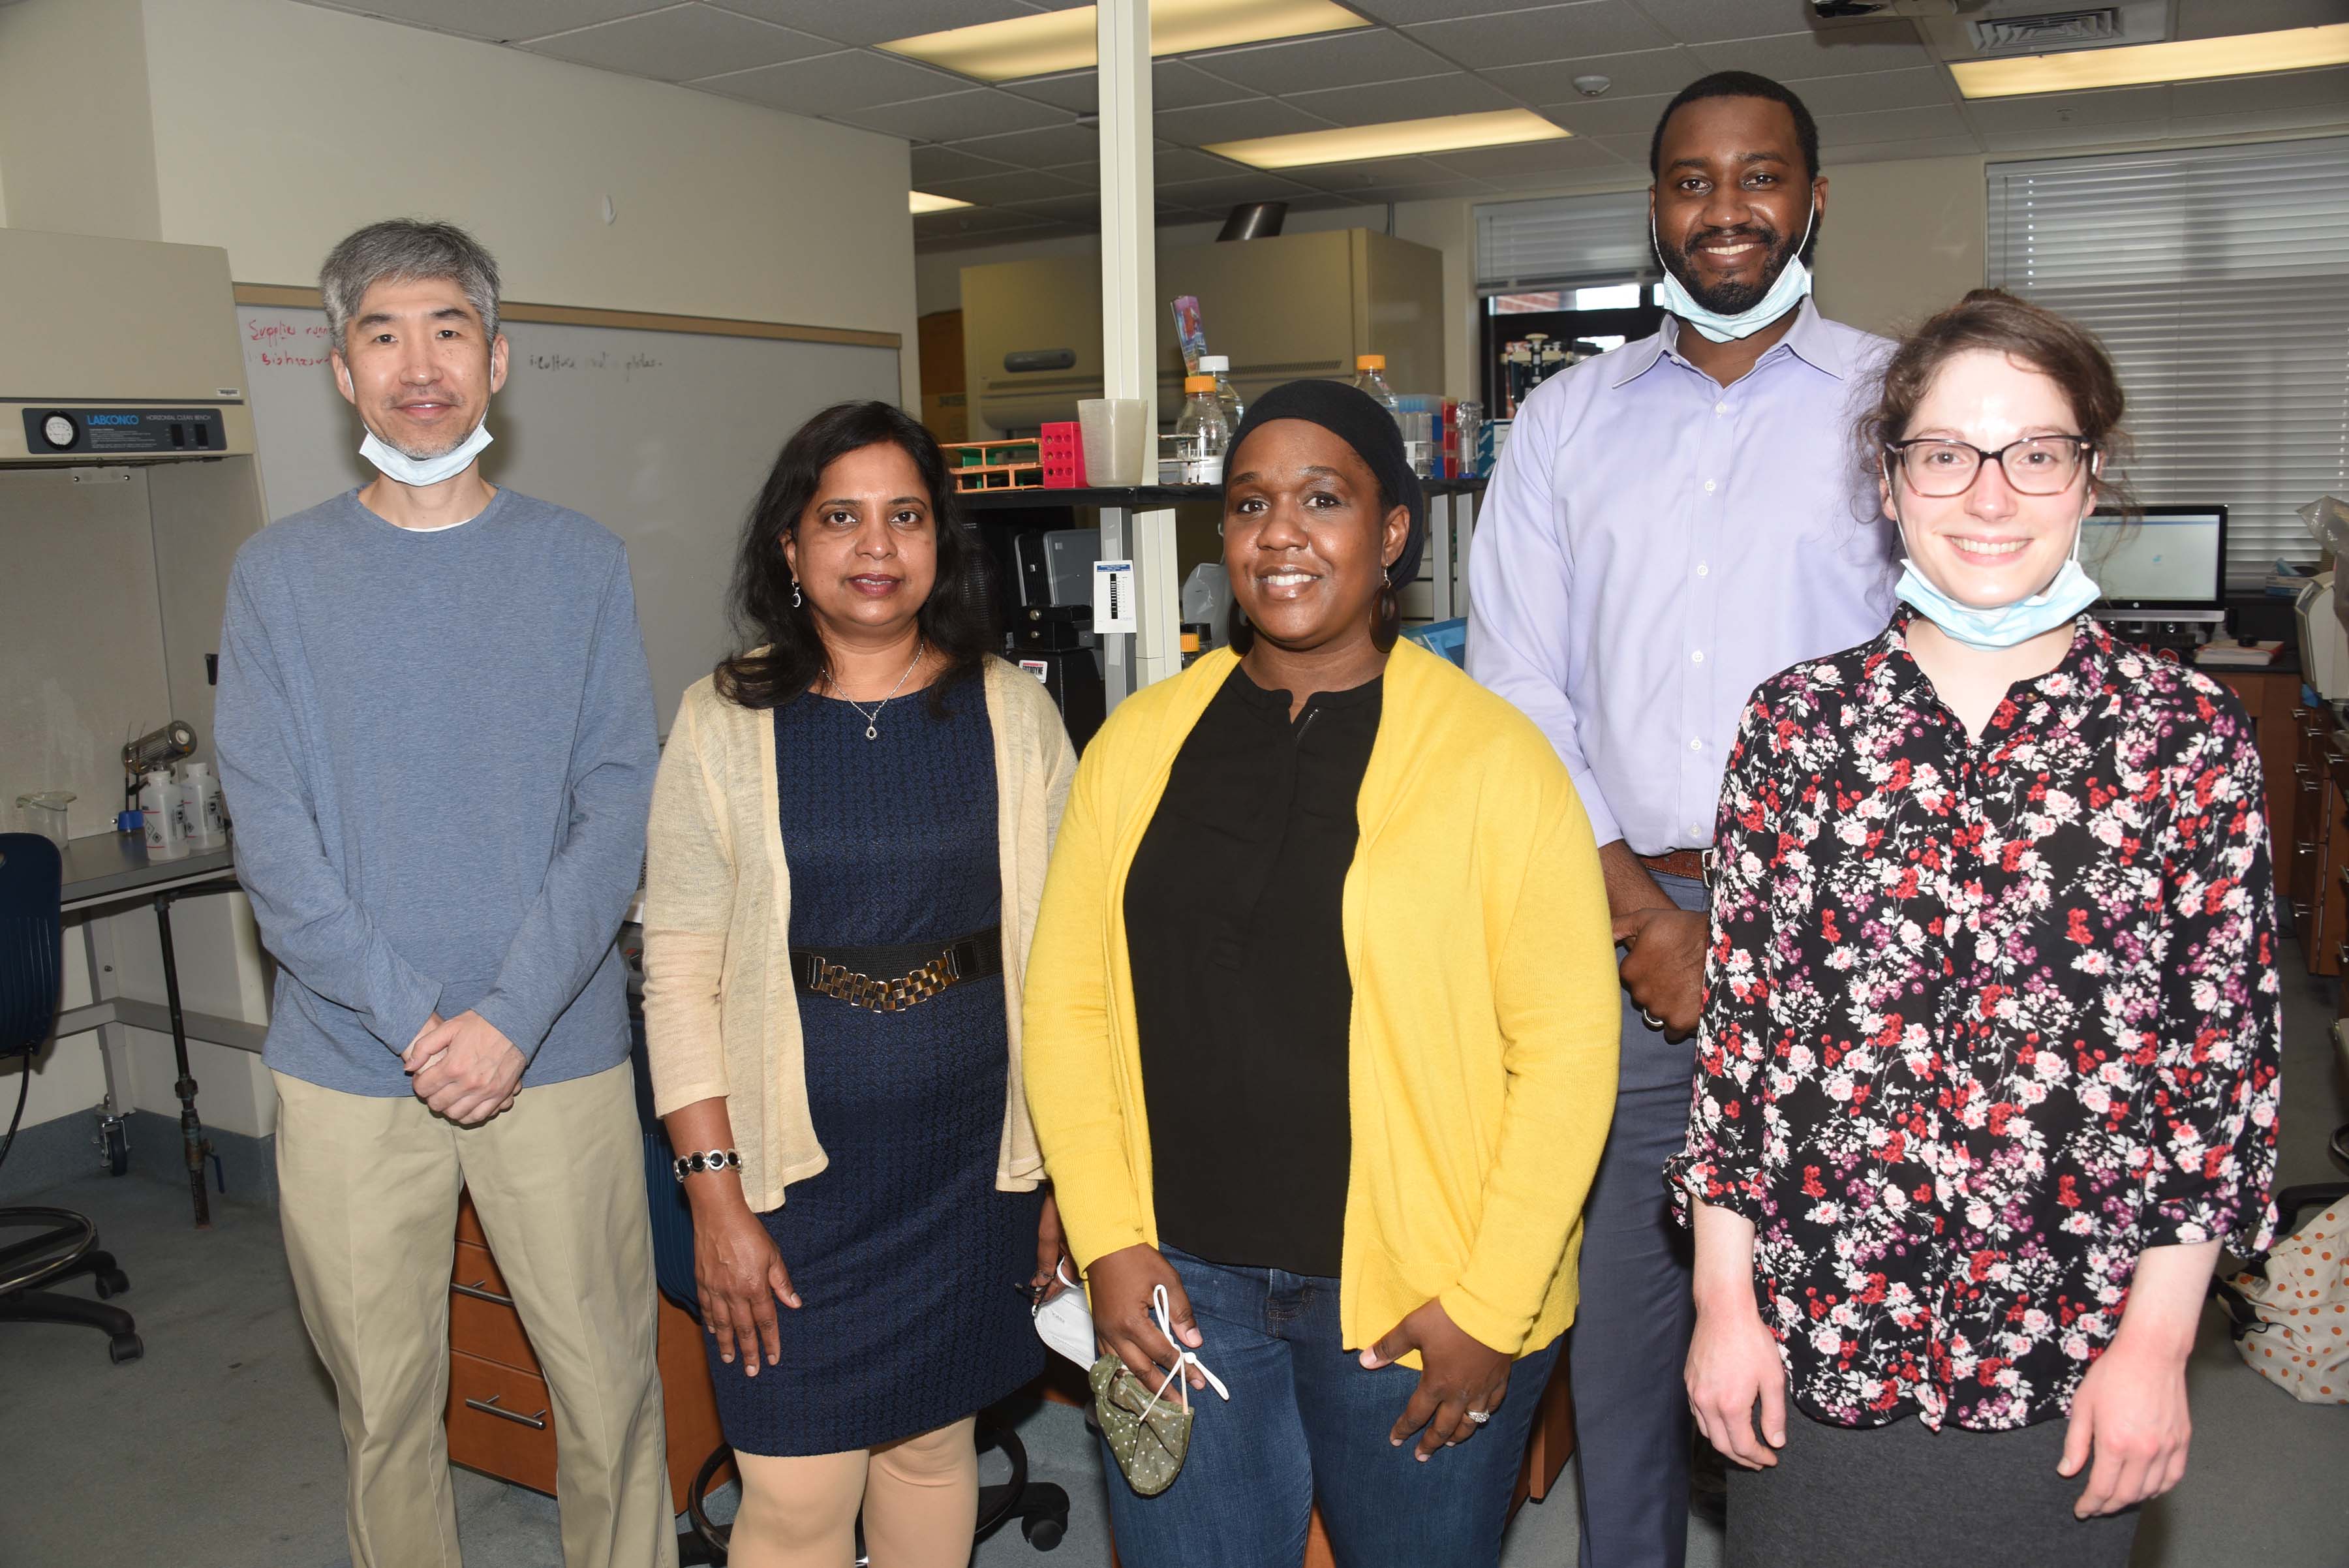 The DNA Core Center team: (l-r) Dr. Jung-lim Lee, associate professor and center director; Dr. Kalpalatha Melmaiee, associate professor, Dept. of Agriculture and Natural Resources (AGNR); Dr. Antonette Todd, research fellow, AGNR; Dr. Derrick Scott, associate professor, Dept. of Biological Sciences; and Ms. Gin Accumanno, center sequencing manager.